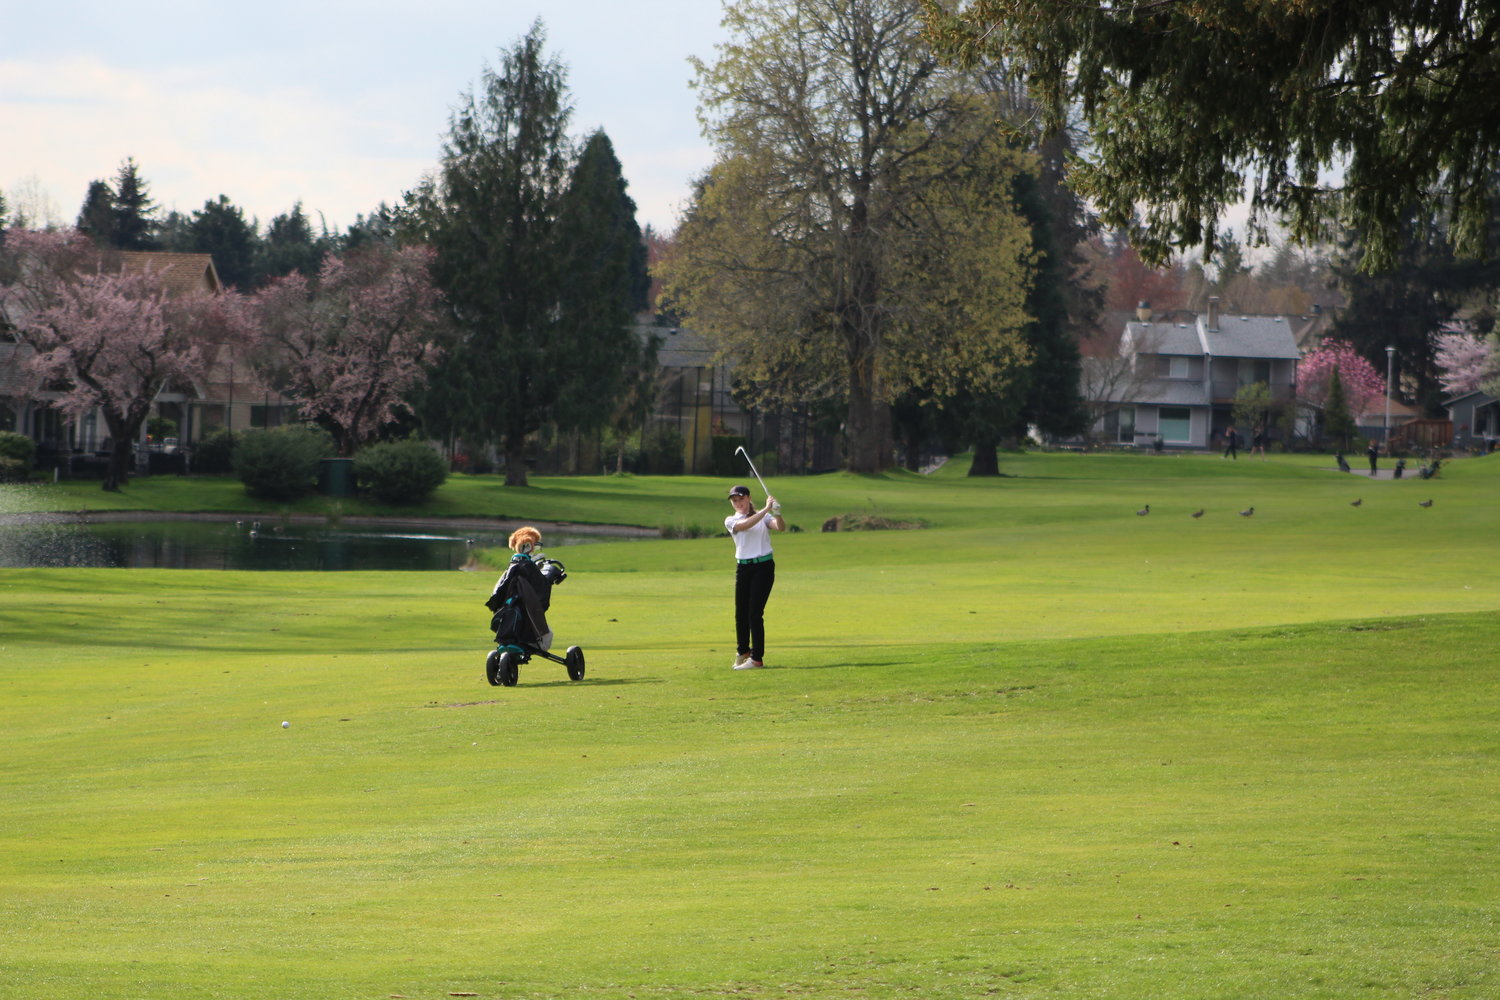 Khloe Rist puts the ball on the green during her game at Fairway Village in Hockinson.